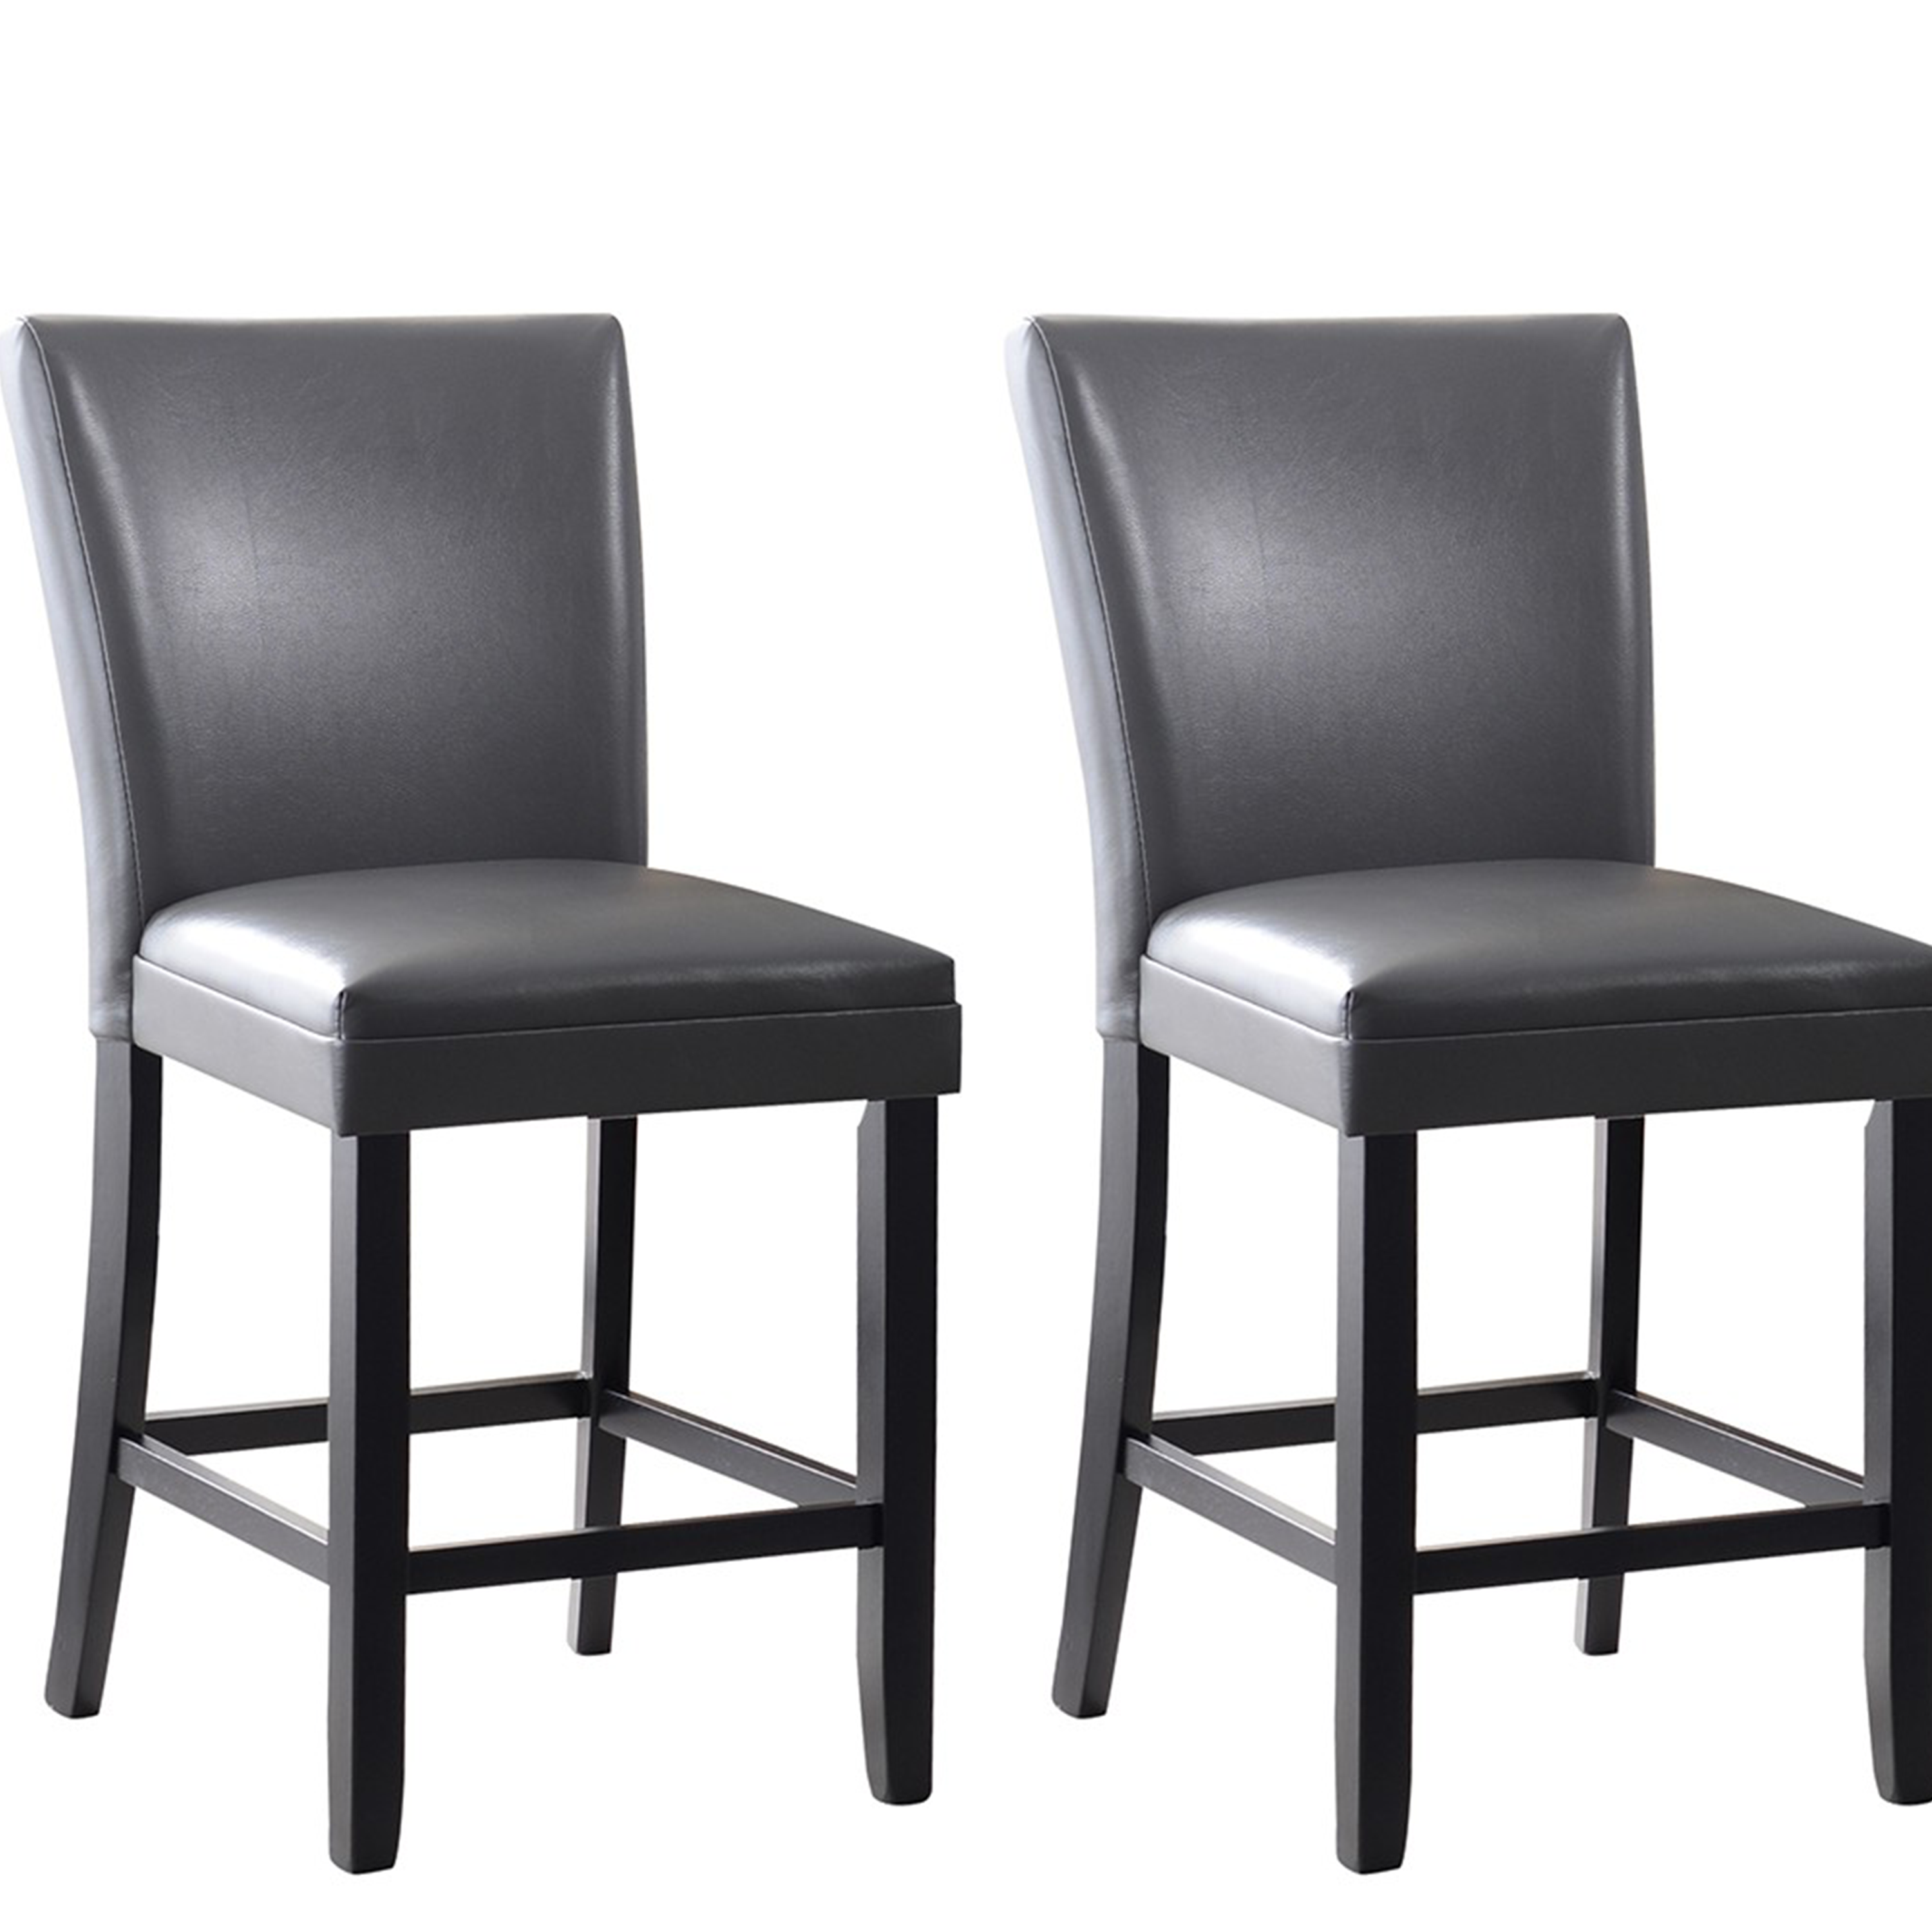 PU Backrest Dining Chair Set of 2, with Wooden Frame, for Restaurant, Cafe, Tavern, Office, Living Room - Gray